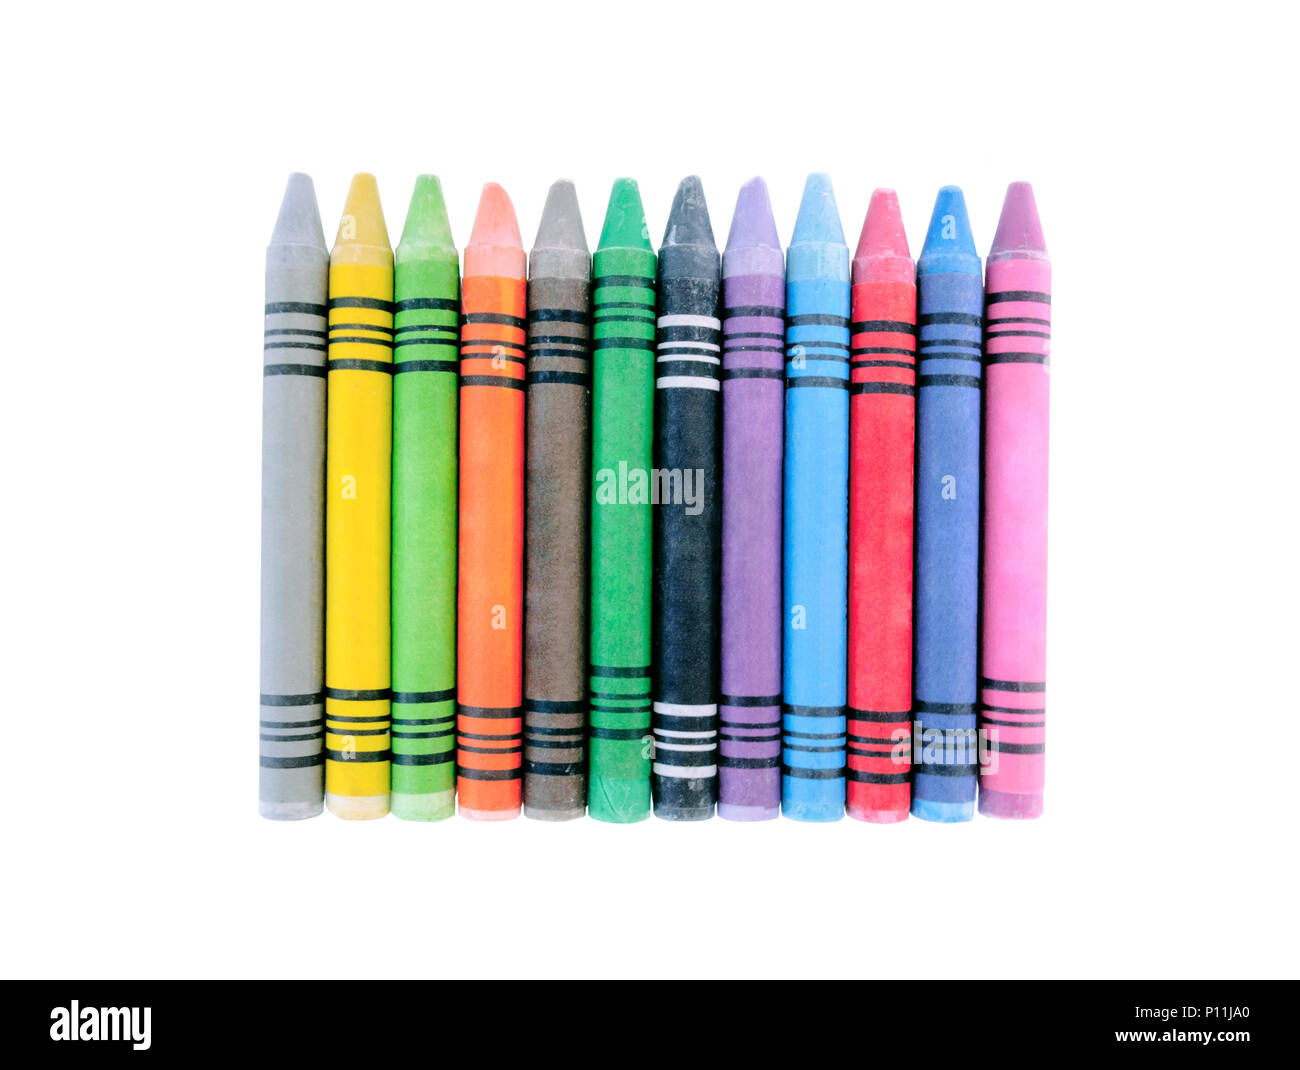 Wax crayons white background Black and White Stock Photos